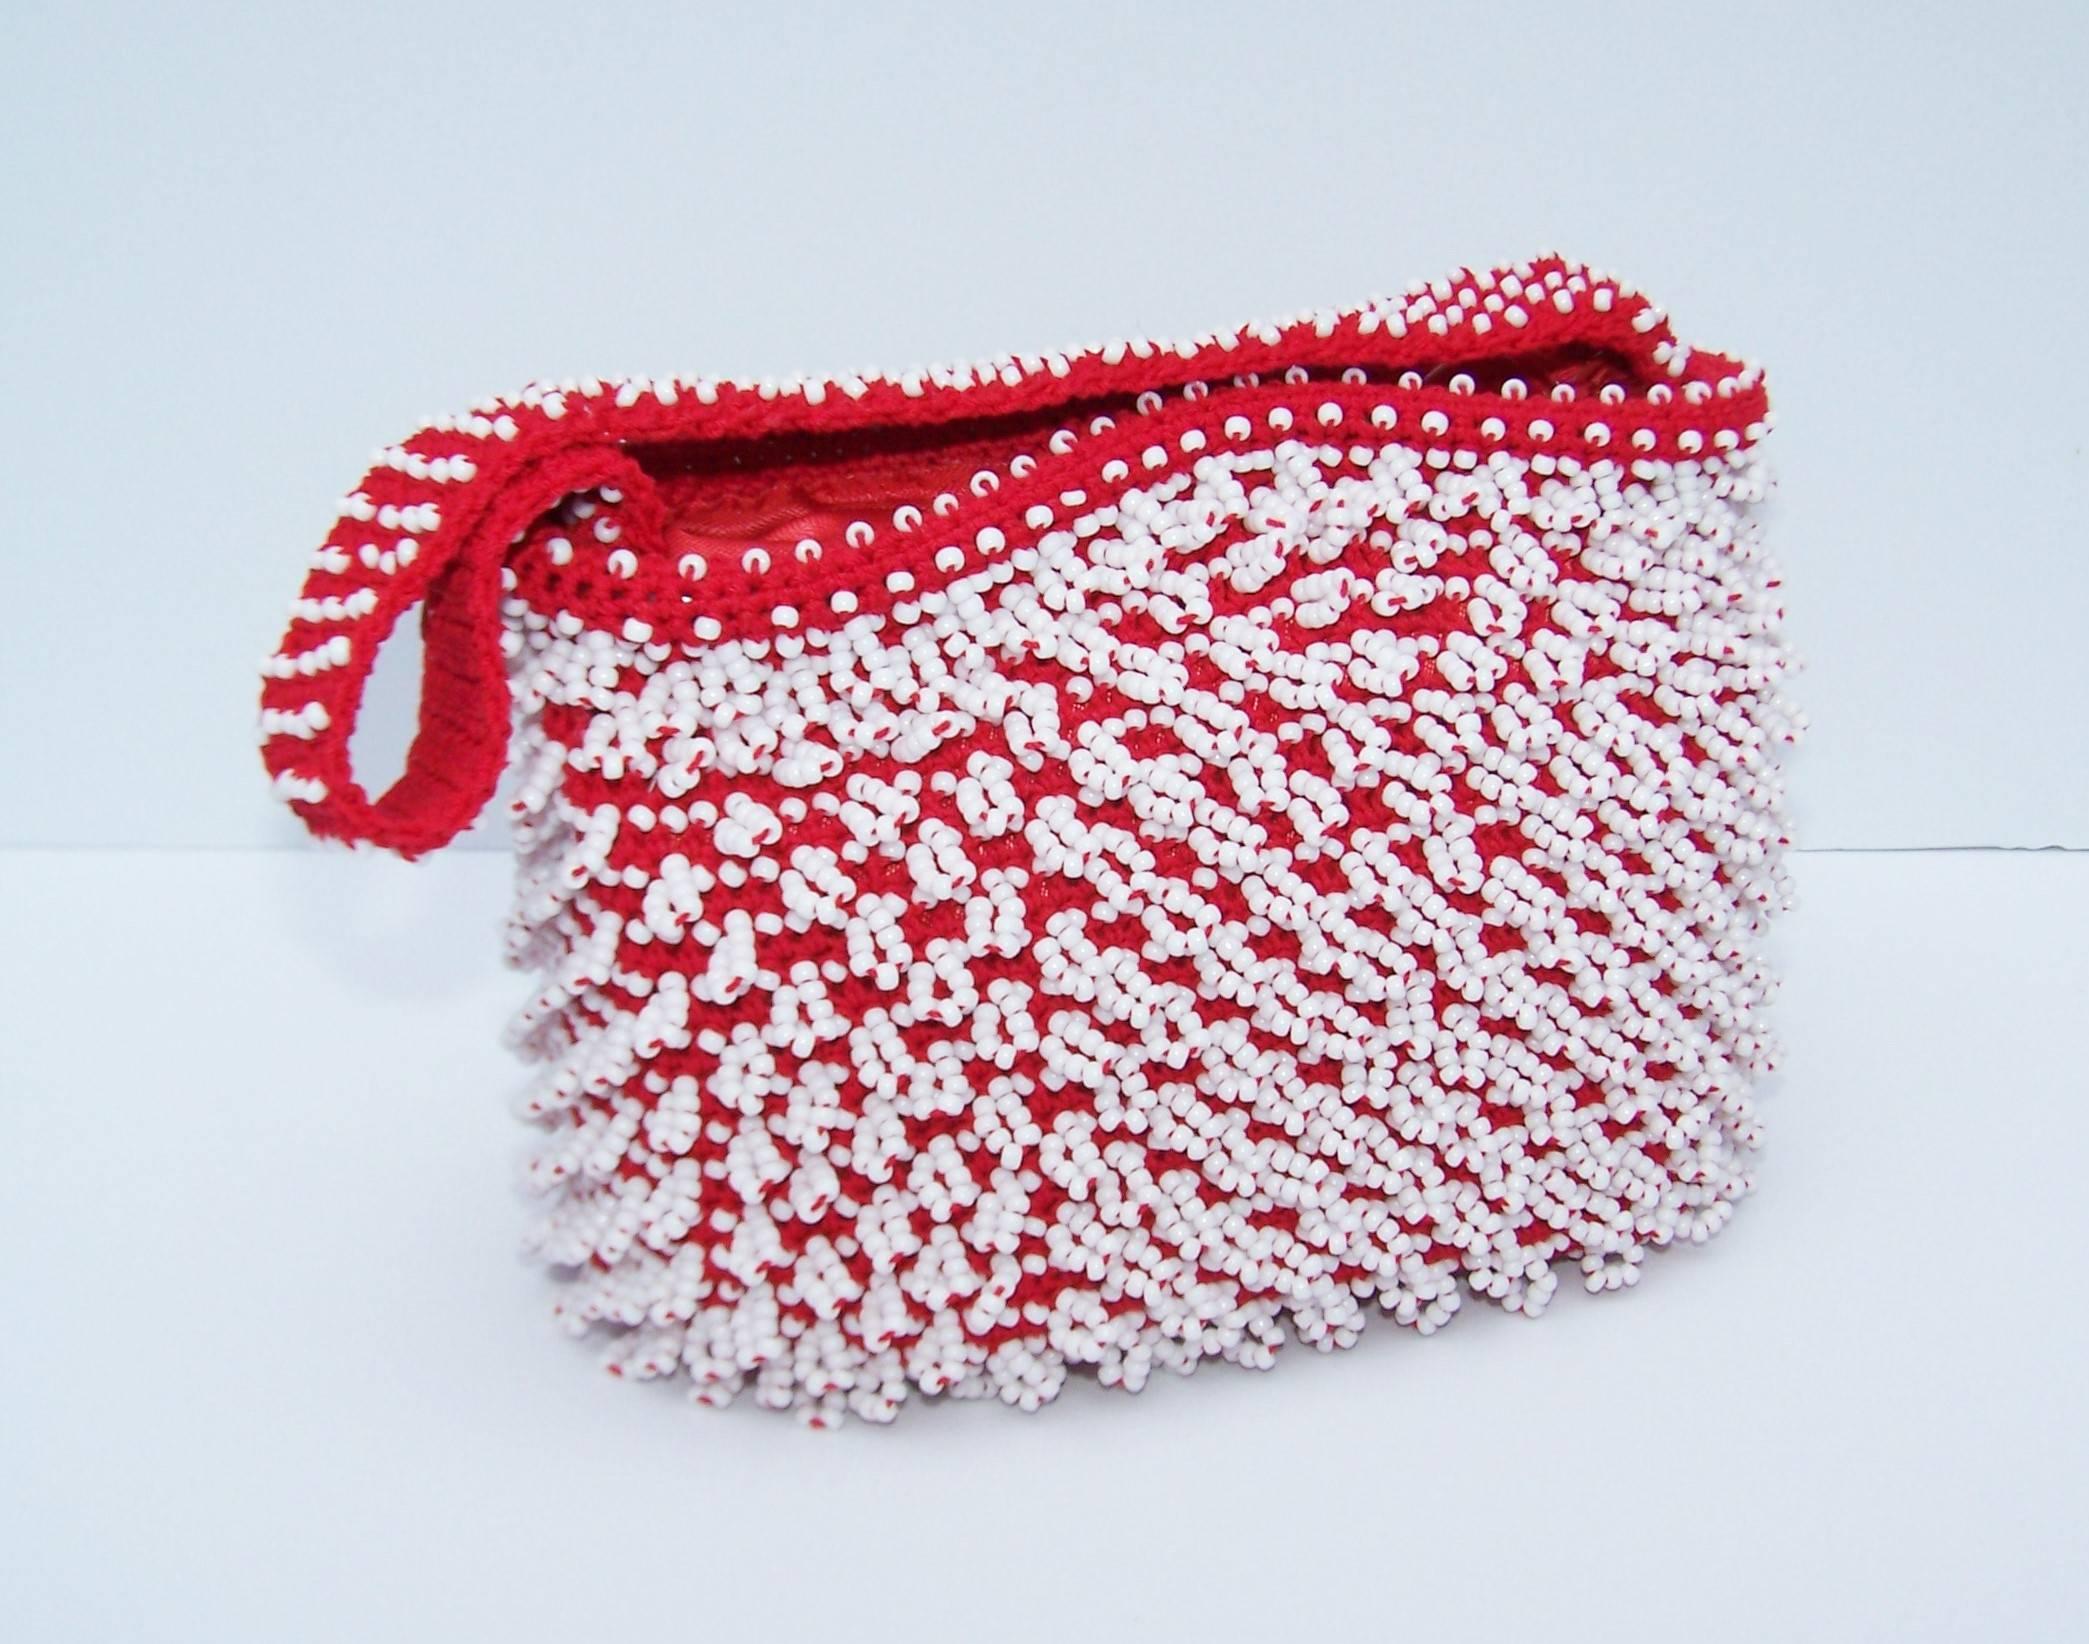 Boho meets mod in this fun little 1960's handbag by Walborg.  Hilde Walborg founded her company in the 1940's and was always in search of the best handmade beading for her designs.  This red knit bag was made in Japan with looped white beading which